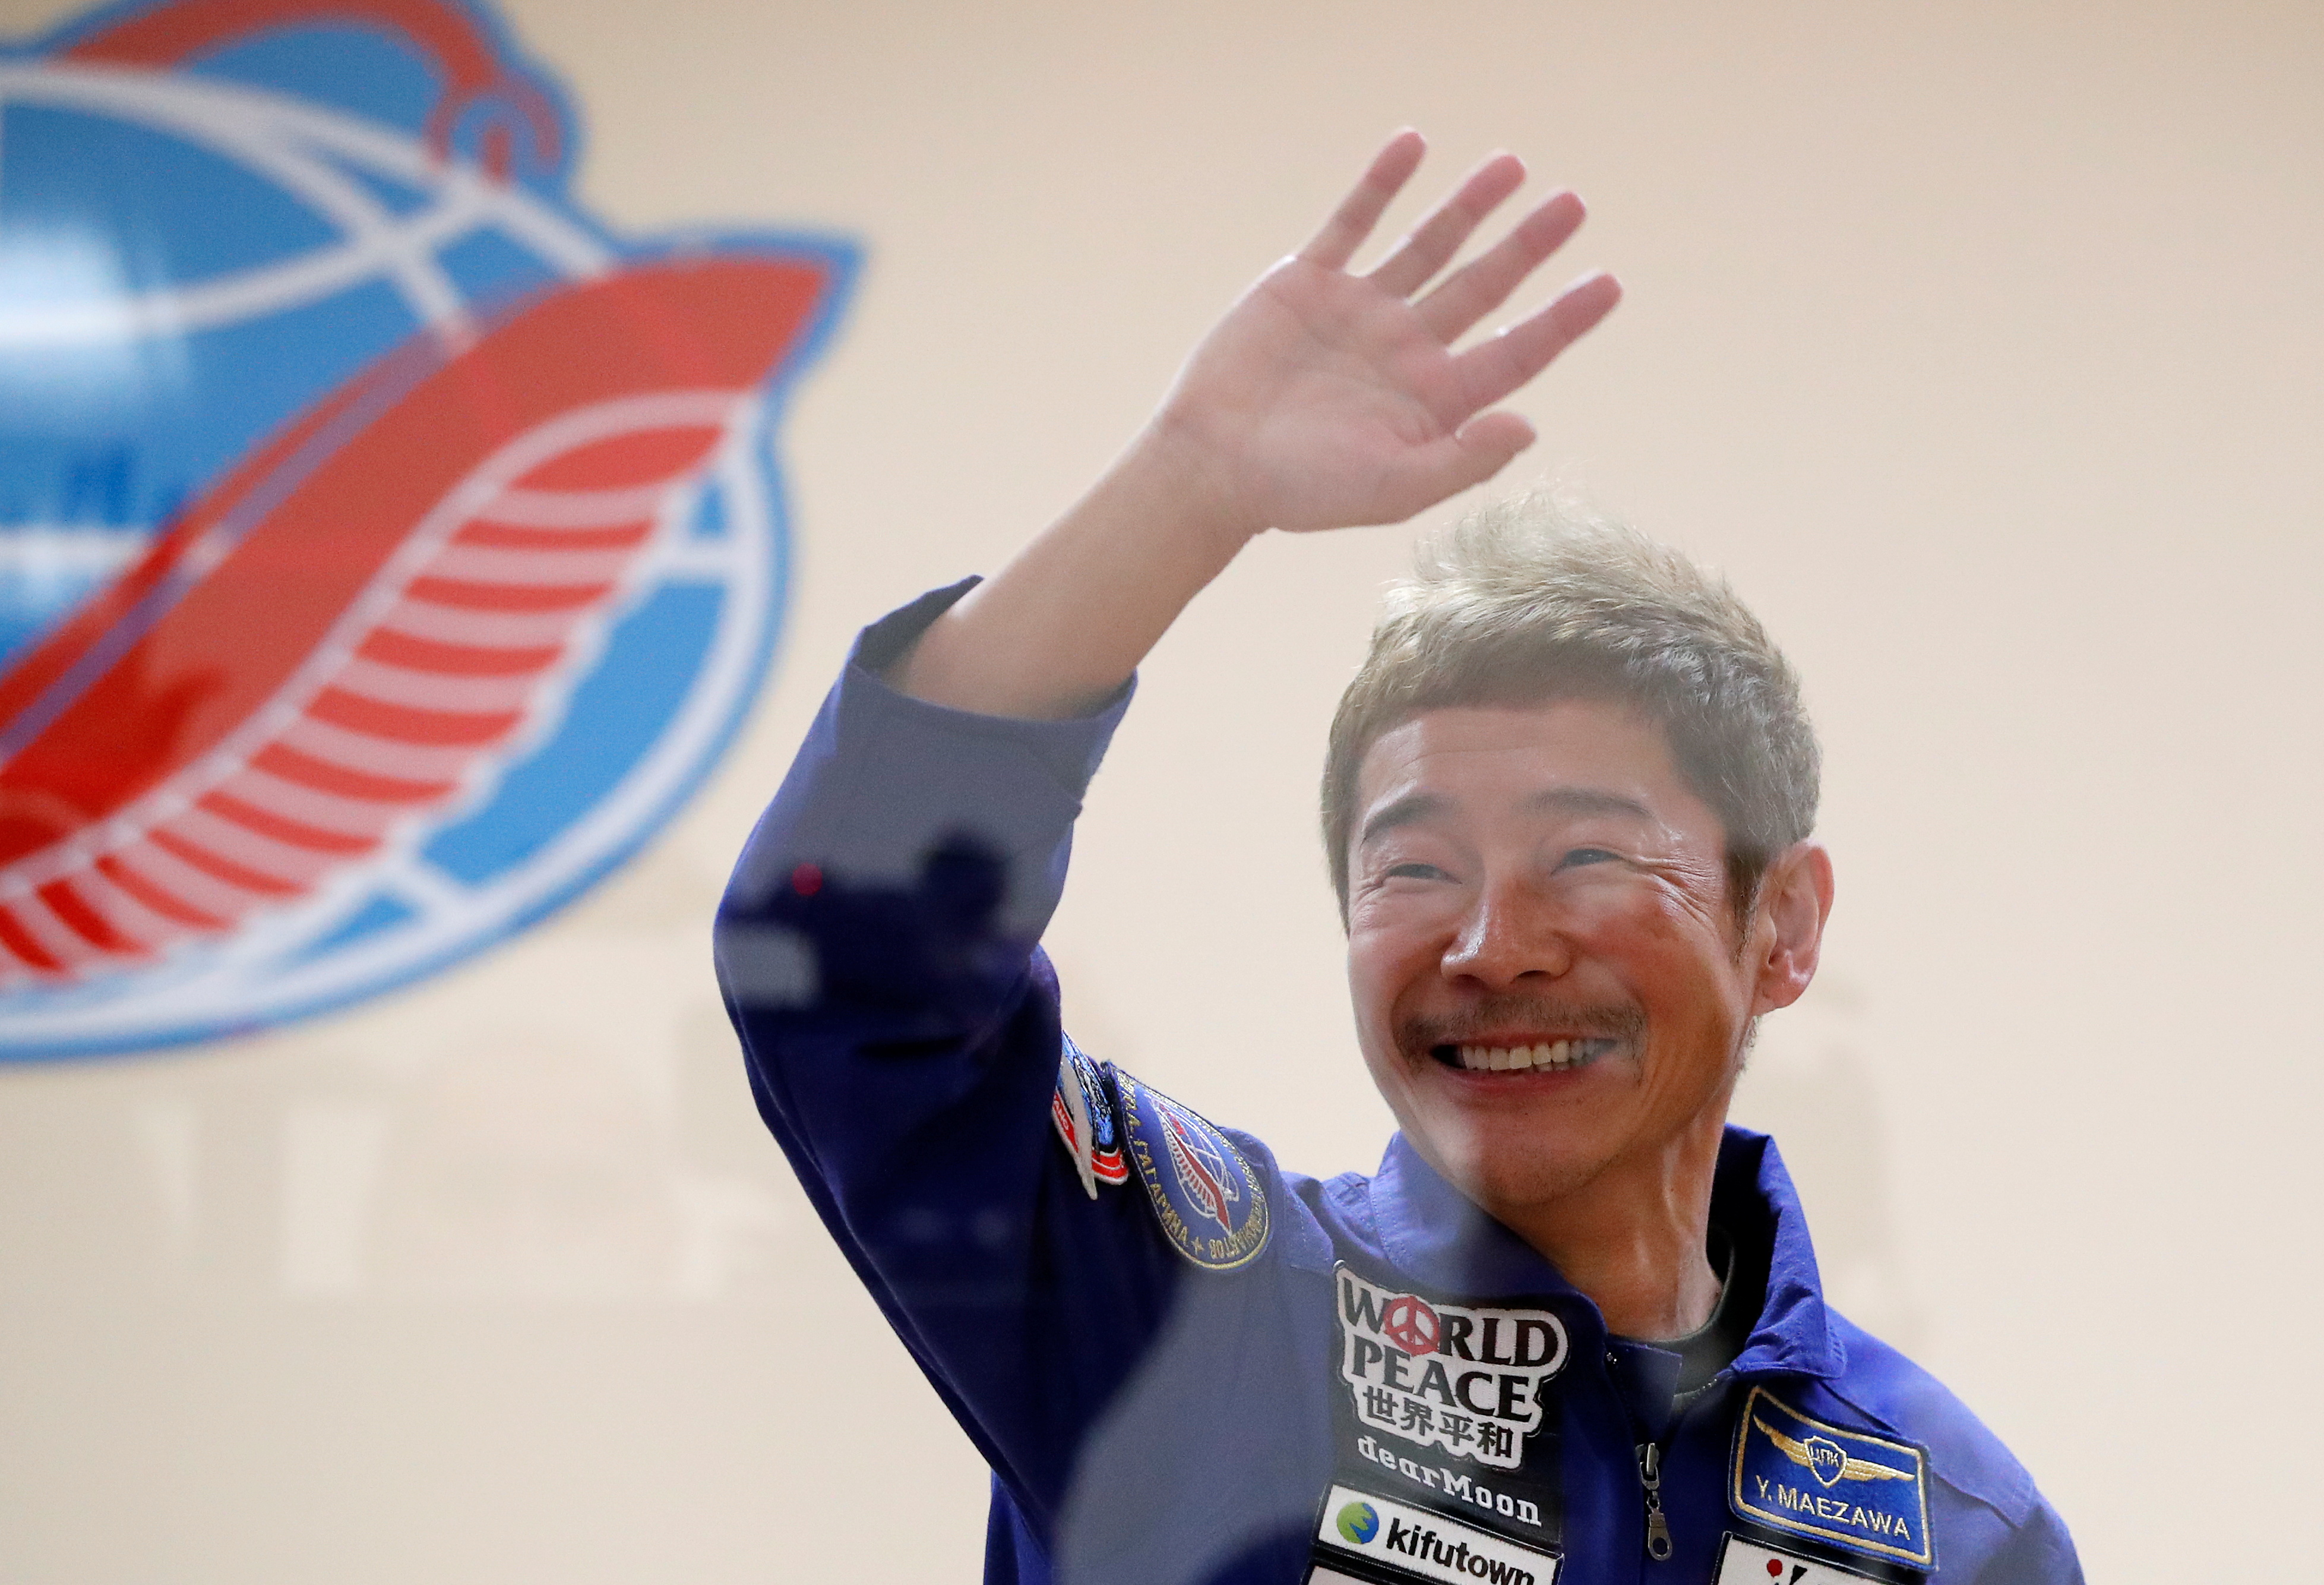 Japanese entrepreneur and space flight participant Yusaku Maezawa waves behind a glass wall during a news conference in Baikonur, Kazakhstan December 7, 2021. Maezawa, Roscosmos cosmonaut Alexander Misurkin and flight participant Yozo Hirano take part in a mission to the International Space Station (ISS) scheduled for December 8, 2021. REUTERS/Shamil Zhumatov/Pool